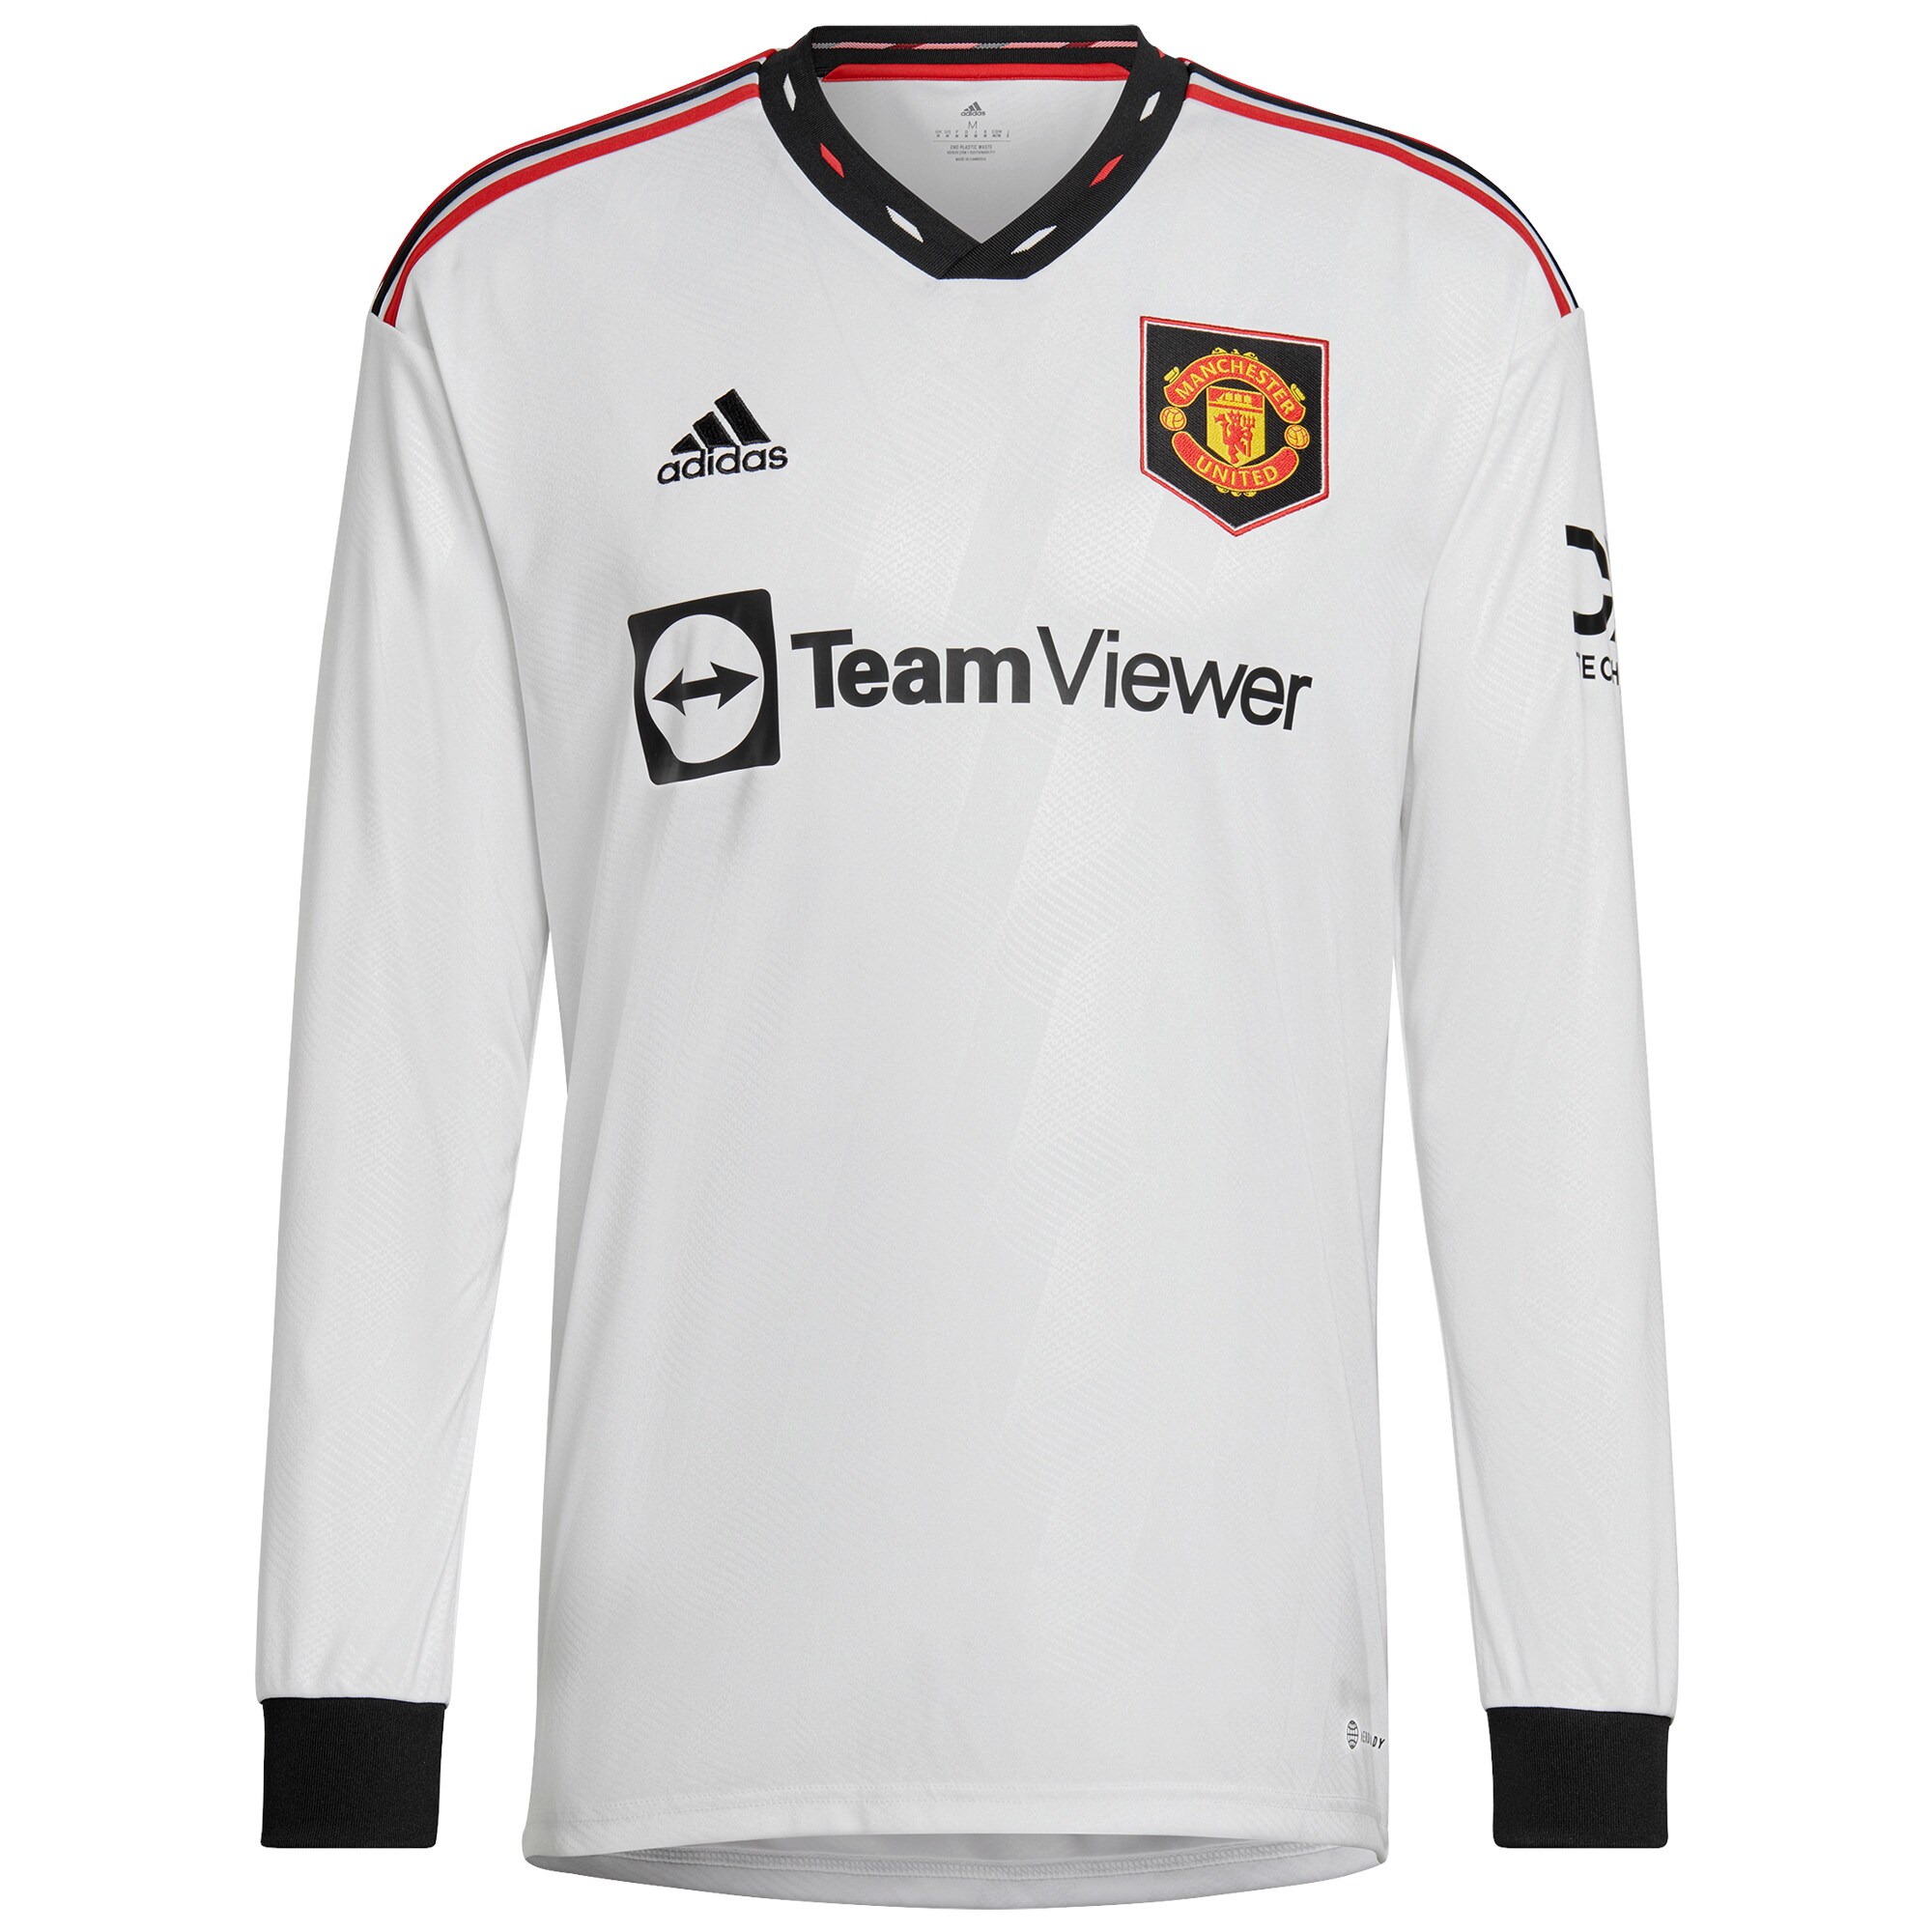 Manchester United Cup Away Shirt 2022-23 - Long Sleeve with Lindelof 2 printing